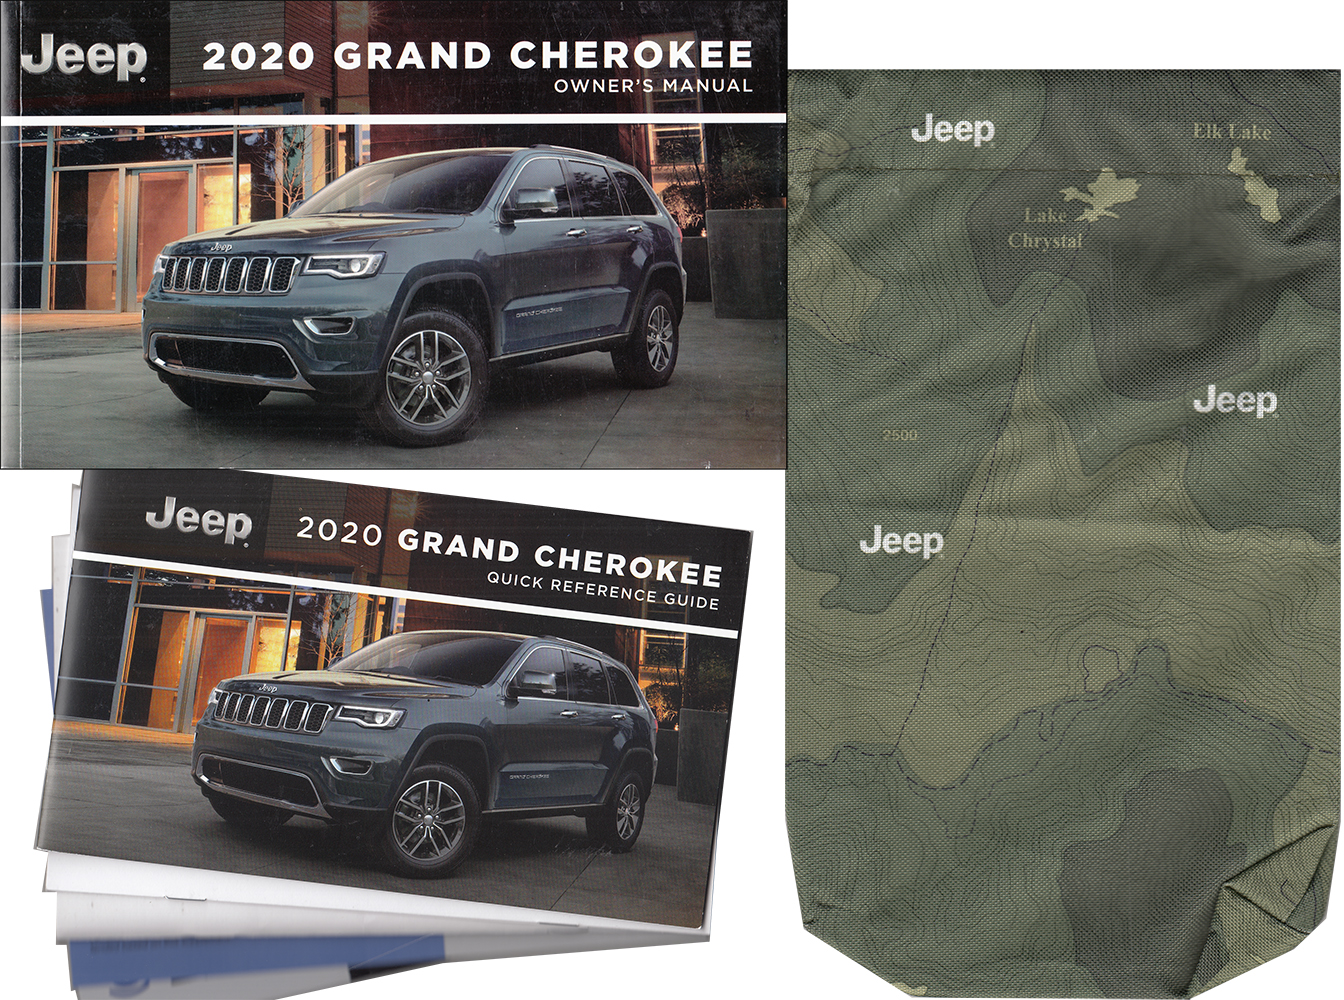 2020 Jeep Grand Cherokee Owner's Manual Package Original - Extended 470-page version